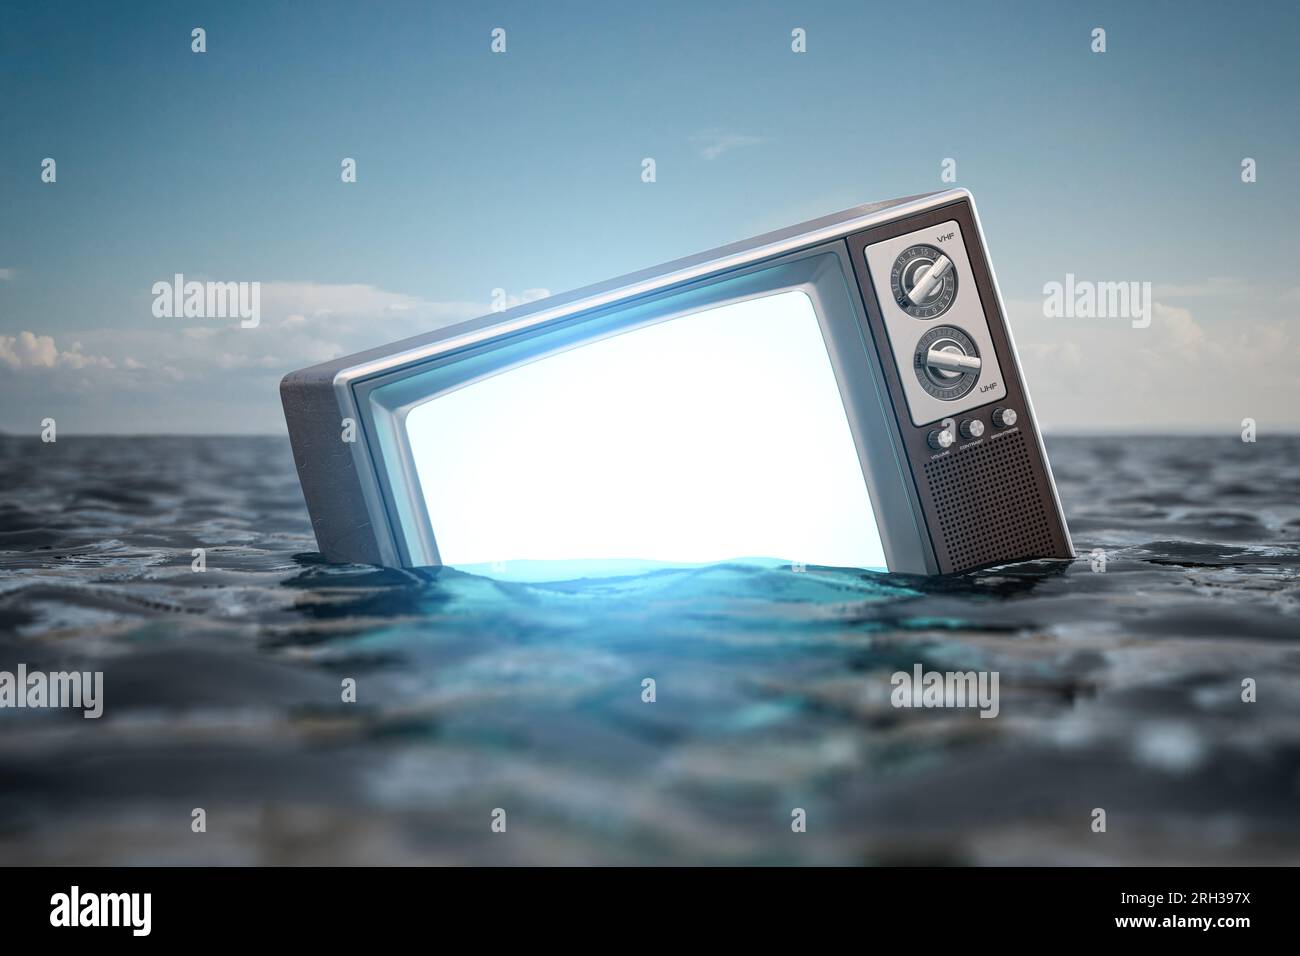 Tv set floating in a water. Concept of crisis of television broadcasting. 3d illustration Stock Photo